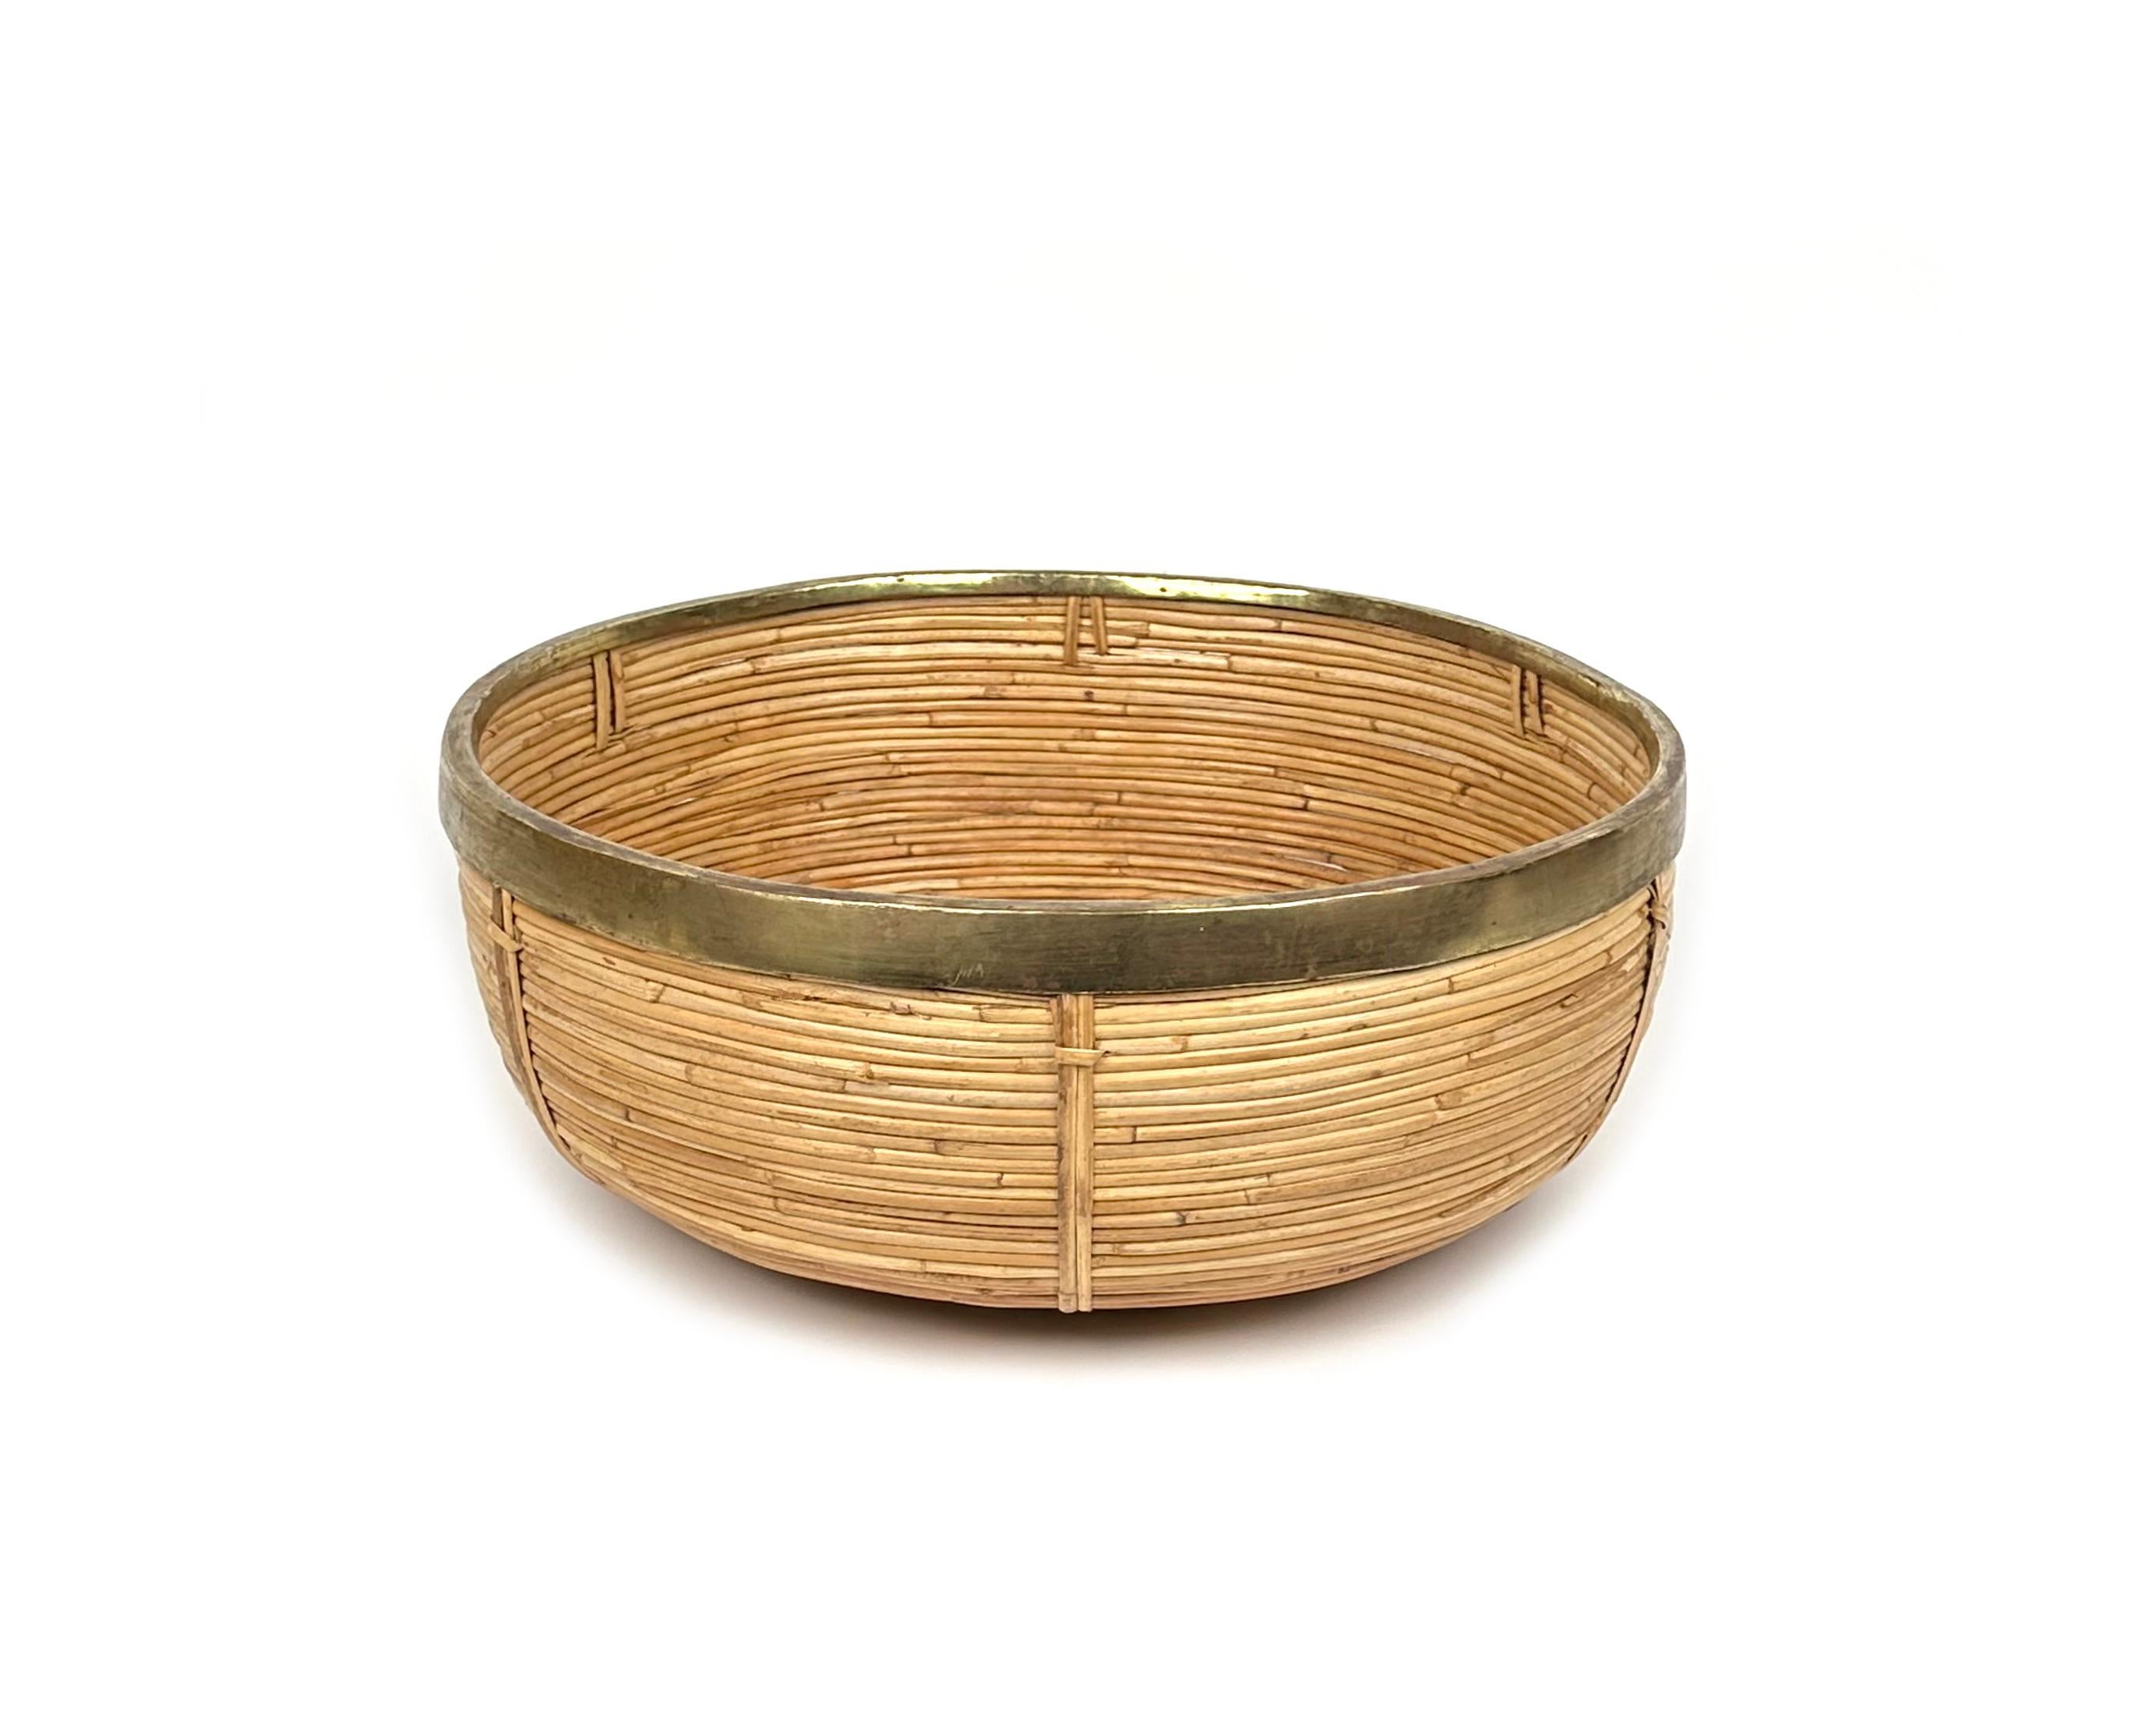 Mid-century brass and rattan large oval bowl, centerpiece or basket.

It has a brass trim covering the top.

Handcrafted in Italy, 1970s.

Use it as fruit bowl or centerpiece to add a stylish midcentury accent in a kitchen. Perfect to storage